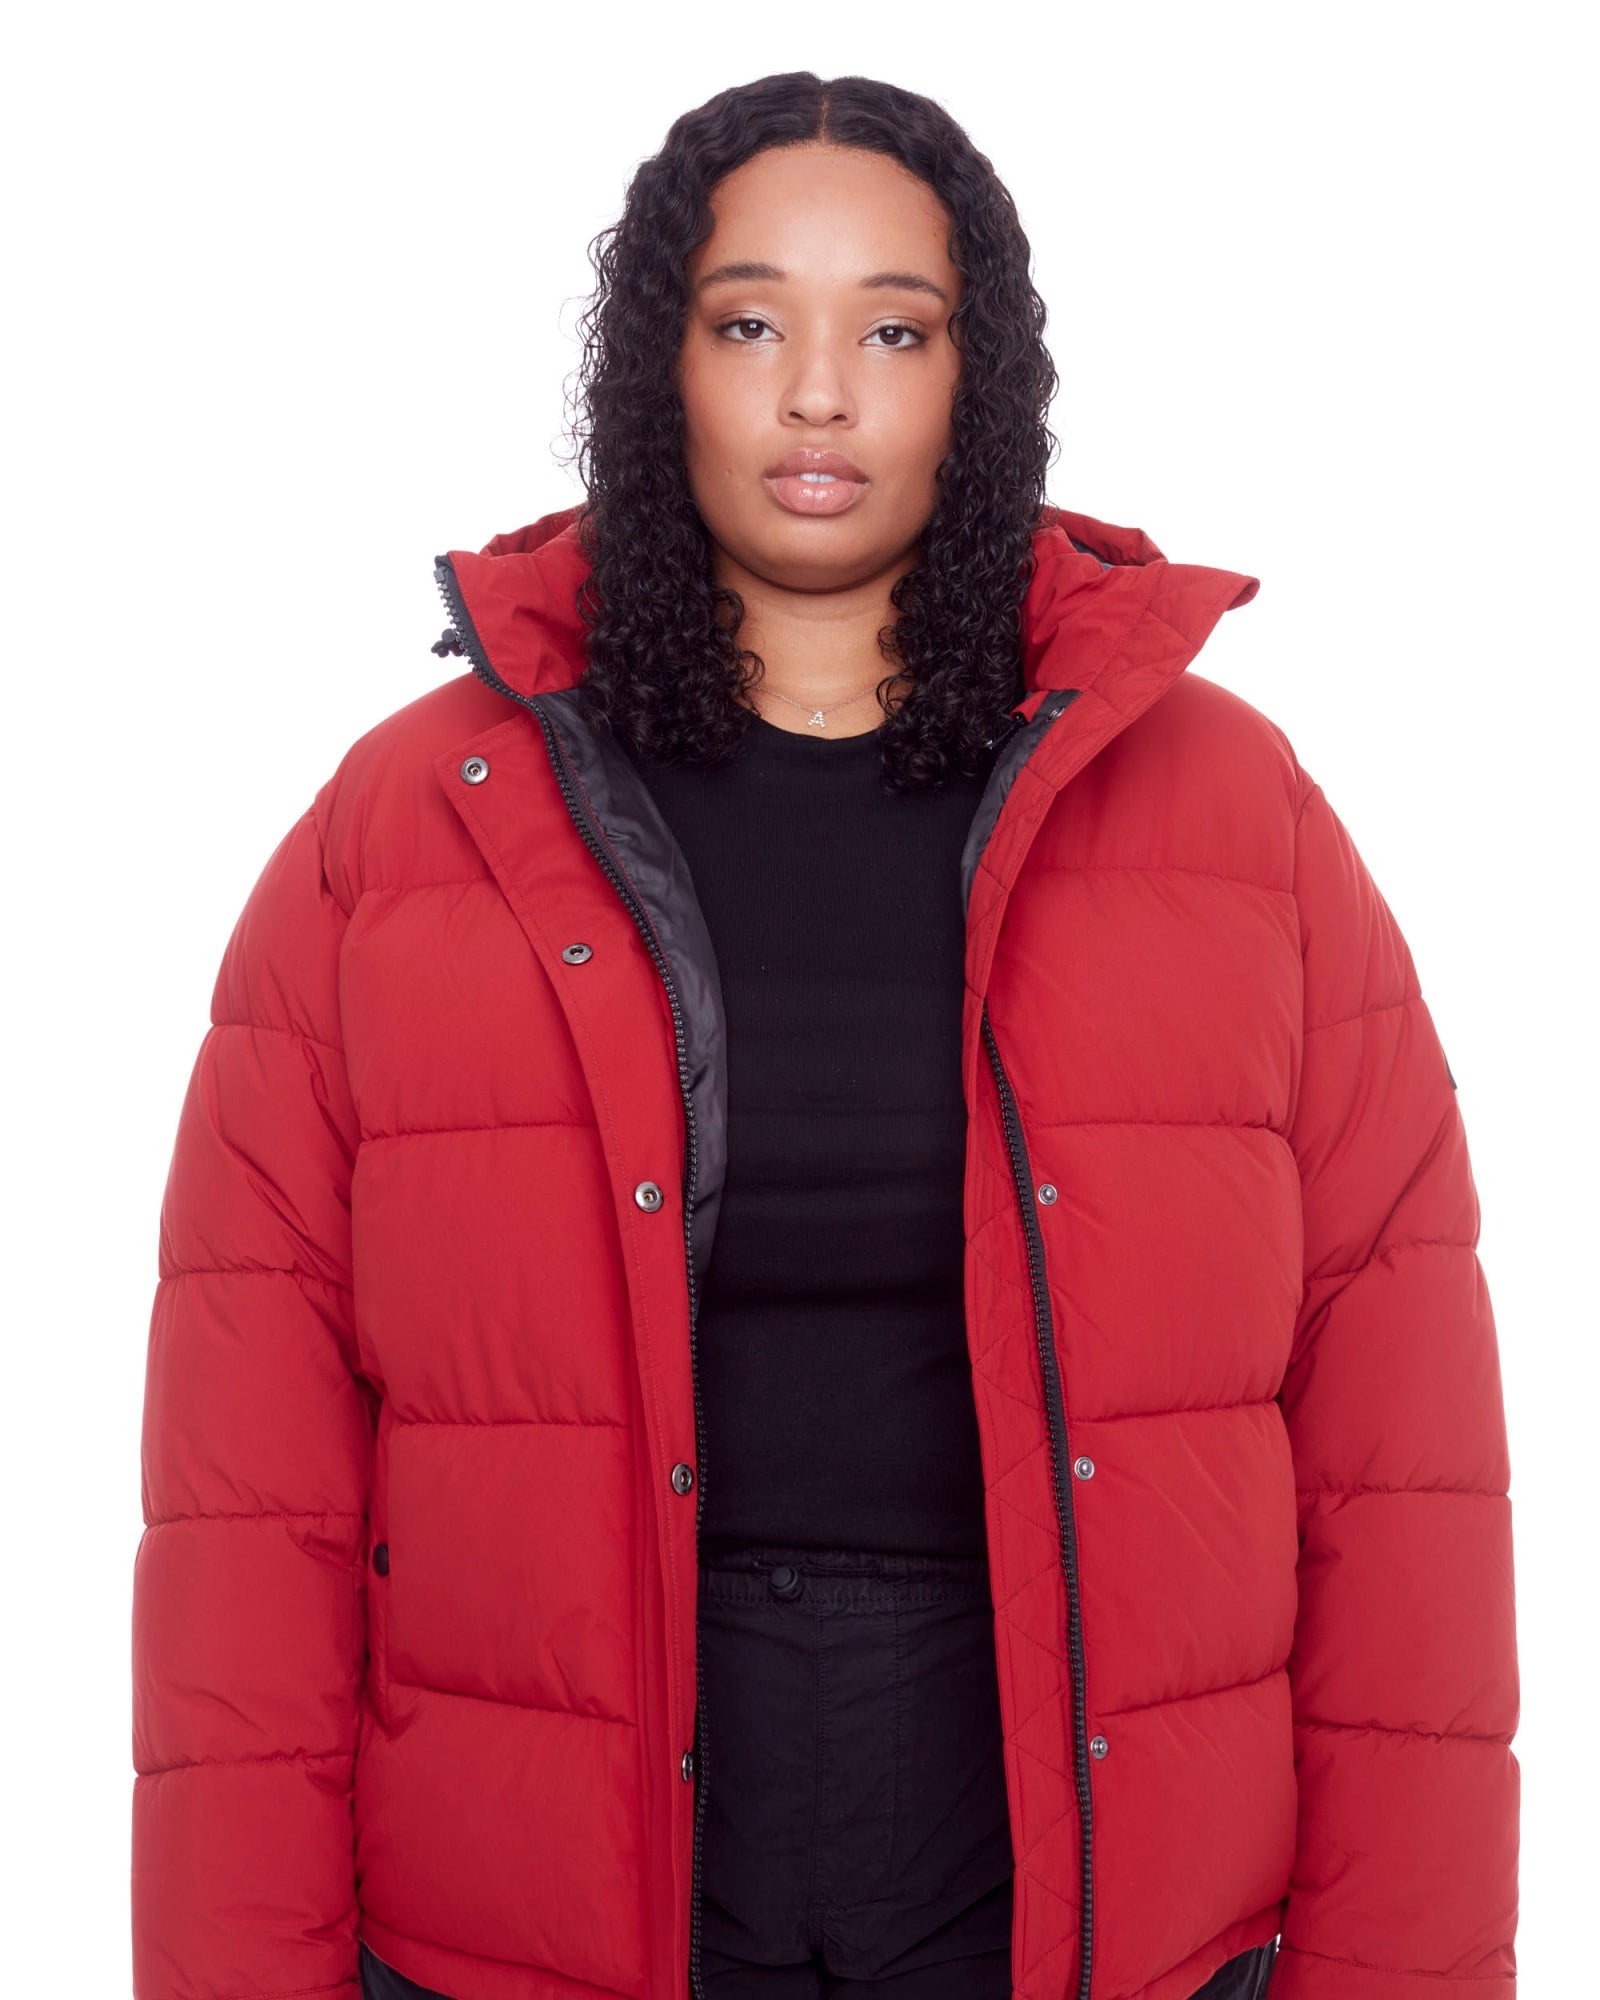 From Puffers to Trench Coats, These Winter Jackets Are Up to 70% Off